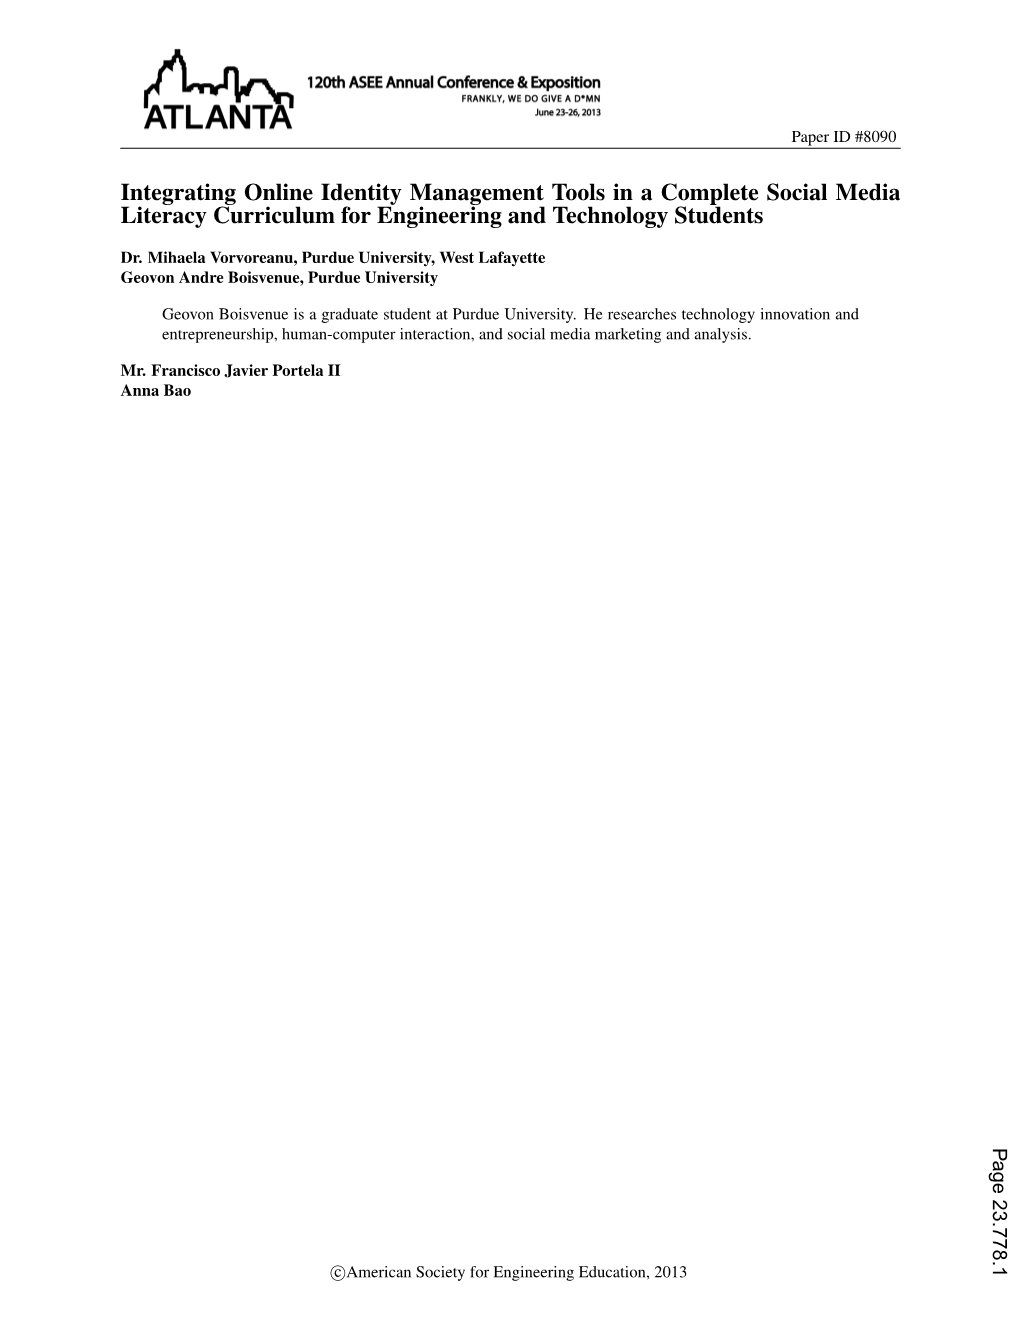 Integrating Online Identity Management Tools in a Complete Social Media Literacy Curriculum for Engineering and Technology Students